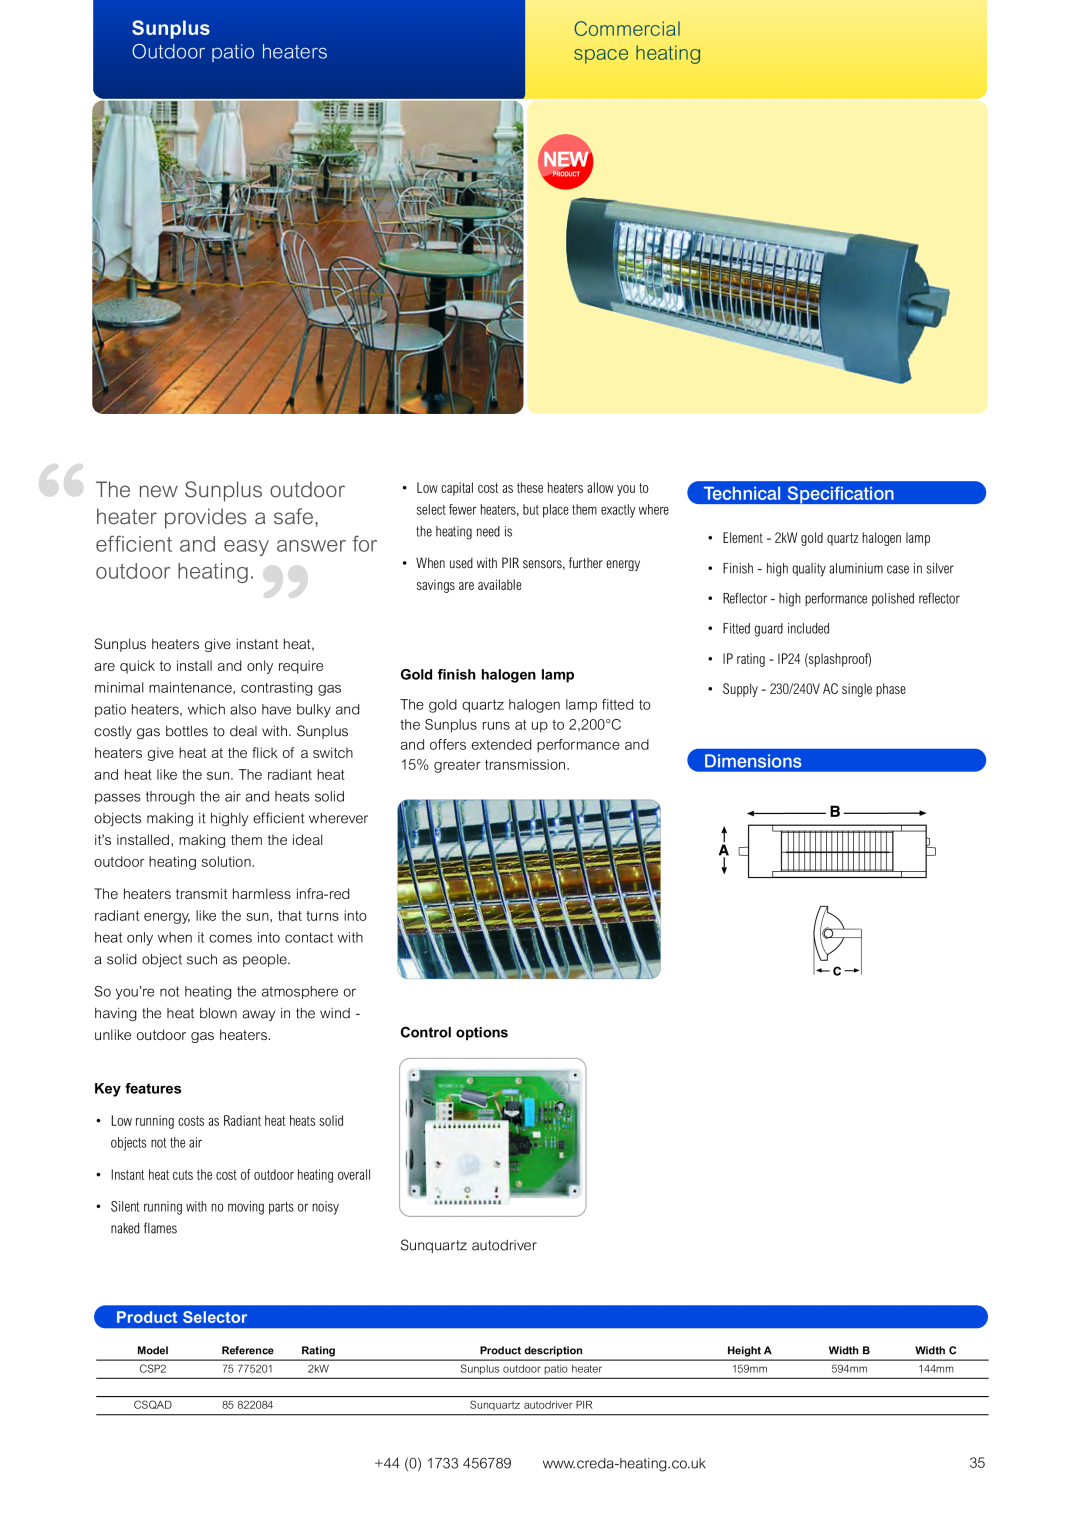 Creda Heating Solution manual Sunplus, Outdoor patio heaters, Commercial space heating, Technical Specification, Dimensions 